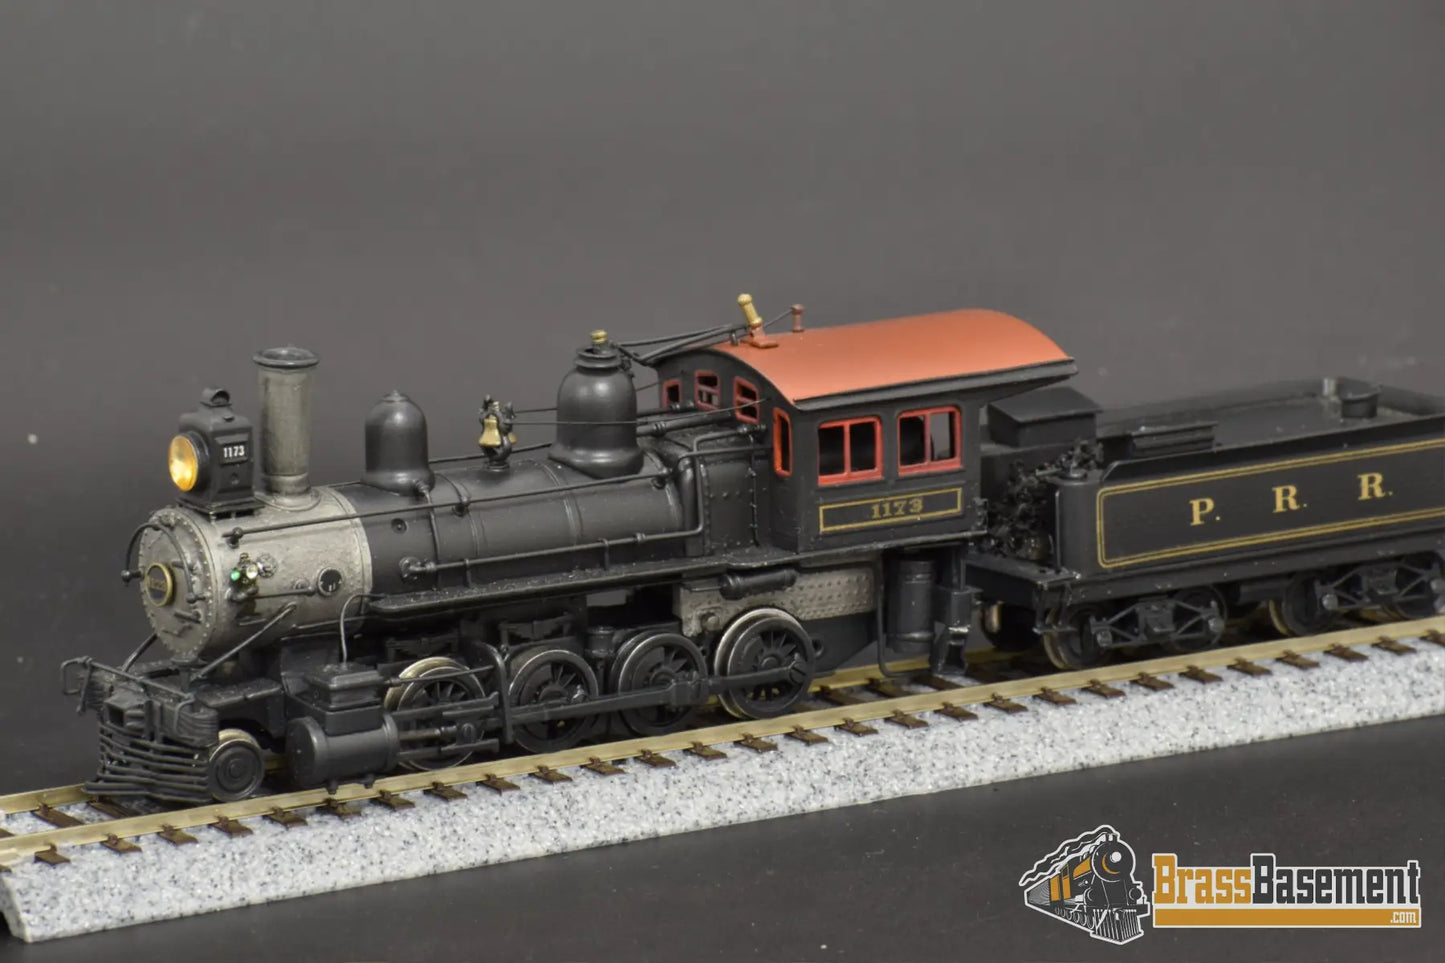 Ho Brass - Empire Midland H - 3 2 - 8 - 0 #1173 Pro Painted Early Gold Lettering Steam